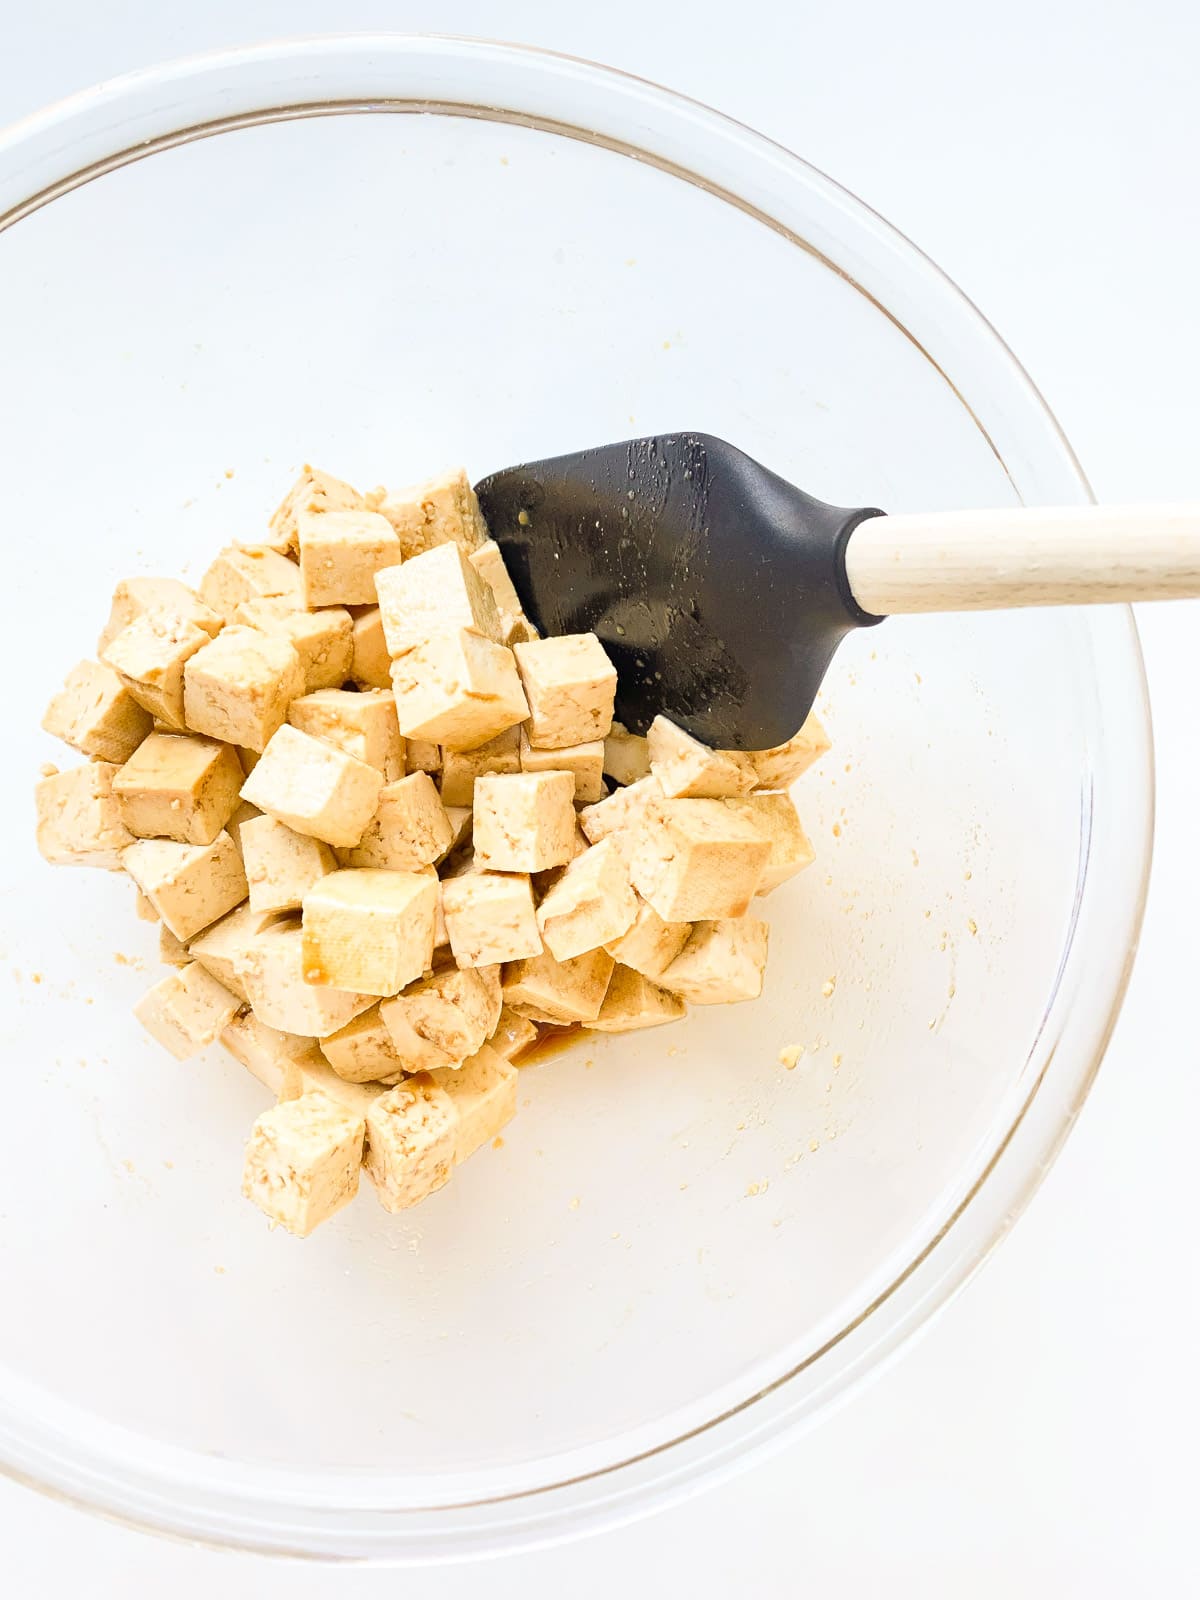 An image of tofu cubes in a glass bowl after being tossed in a marinade.